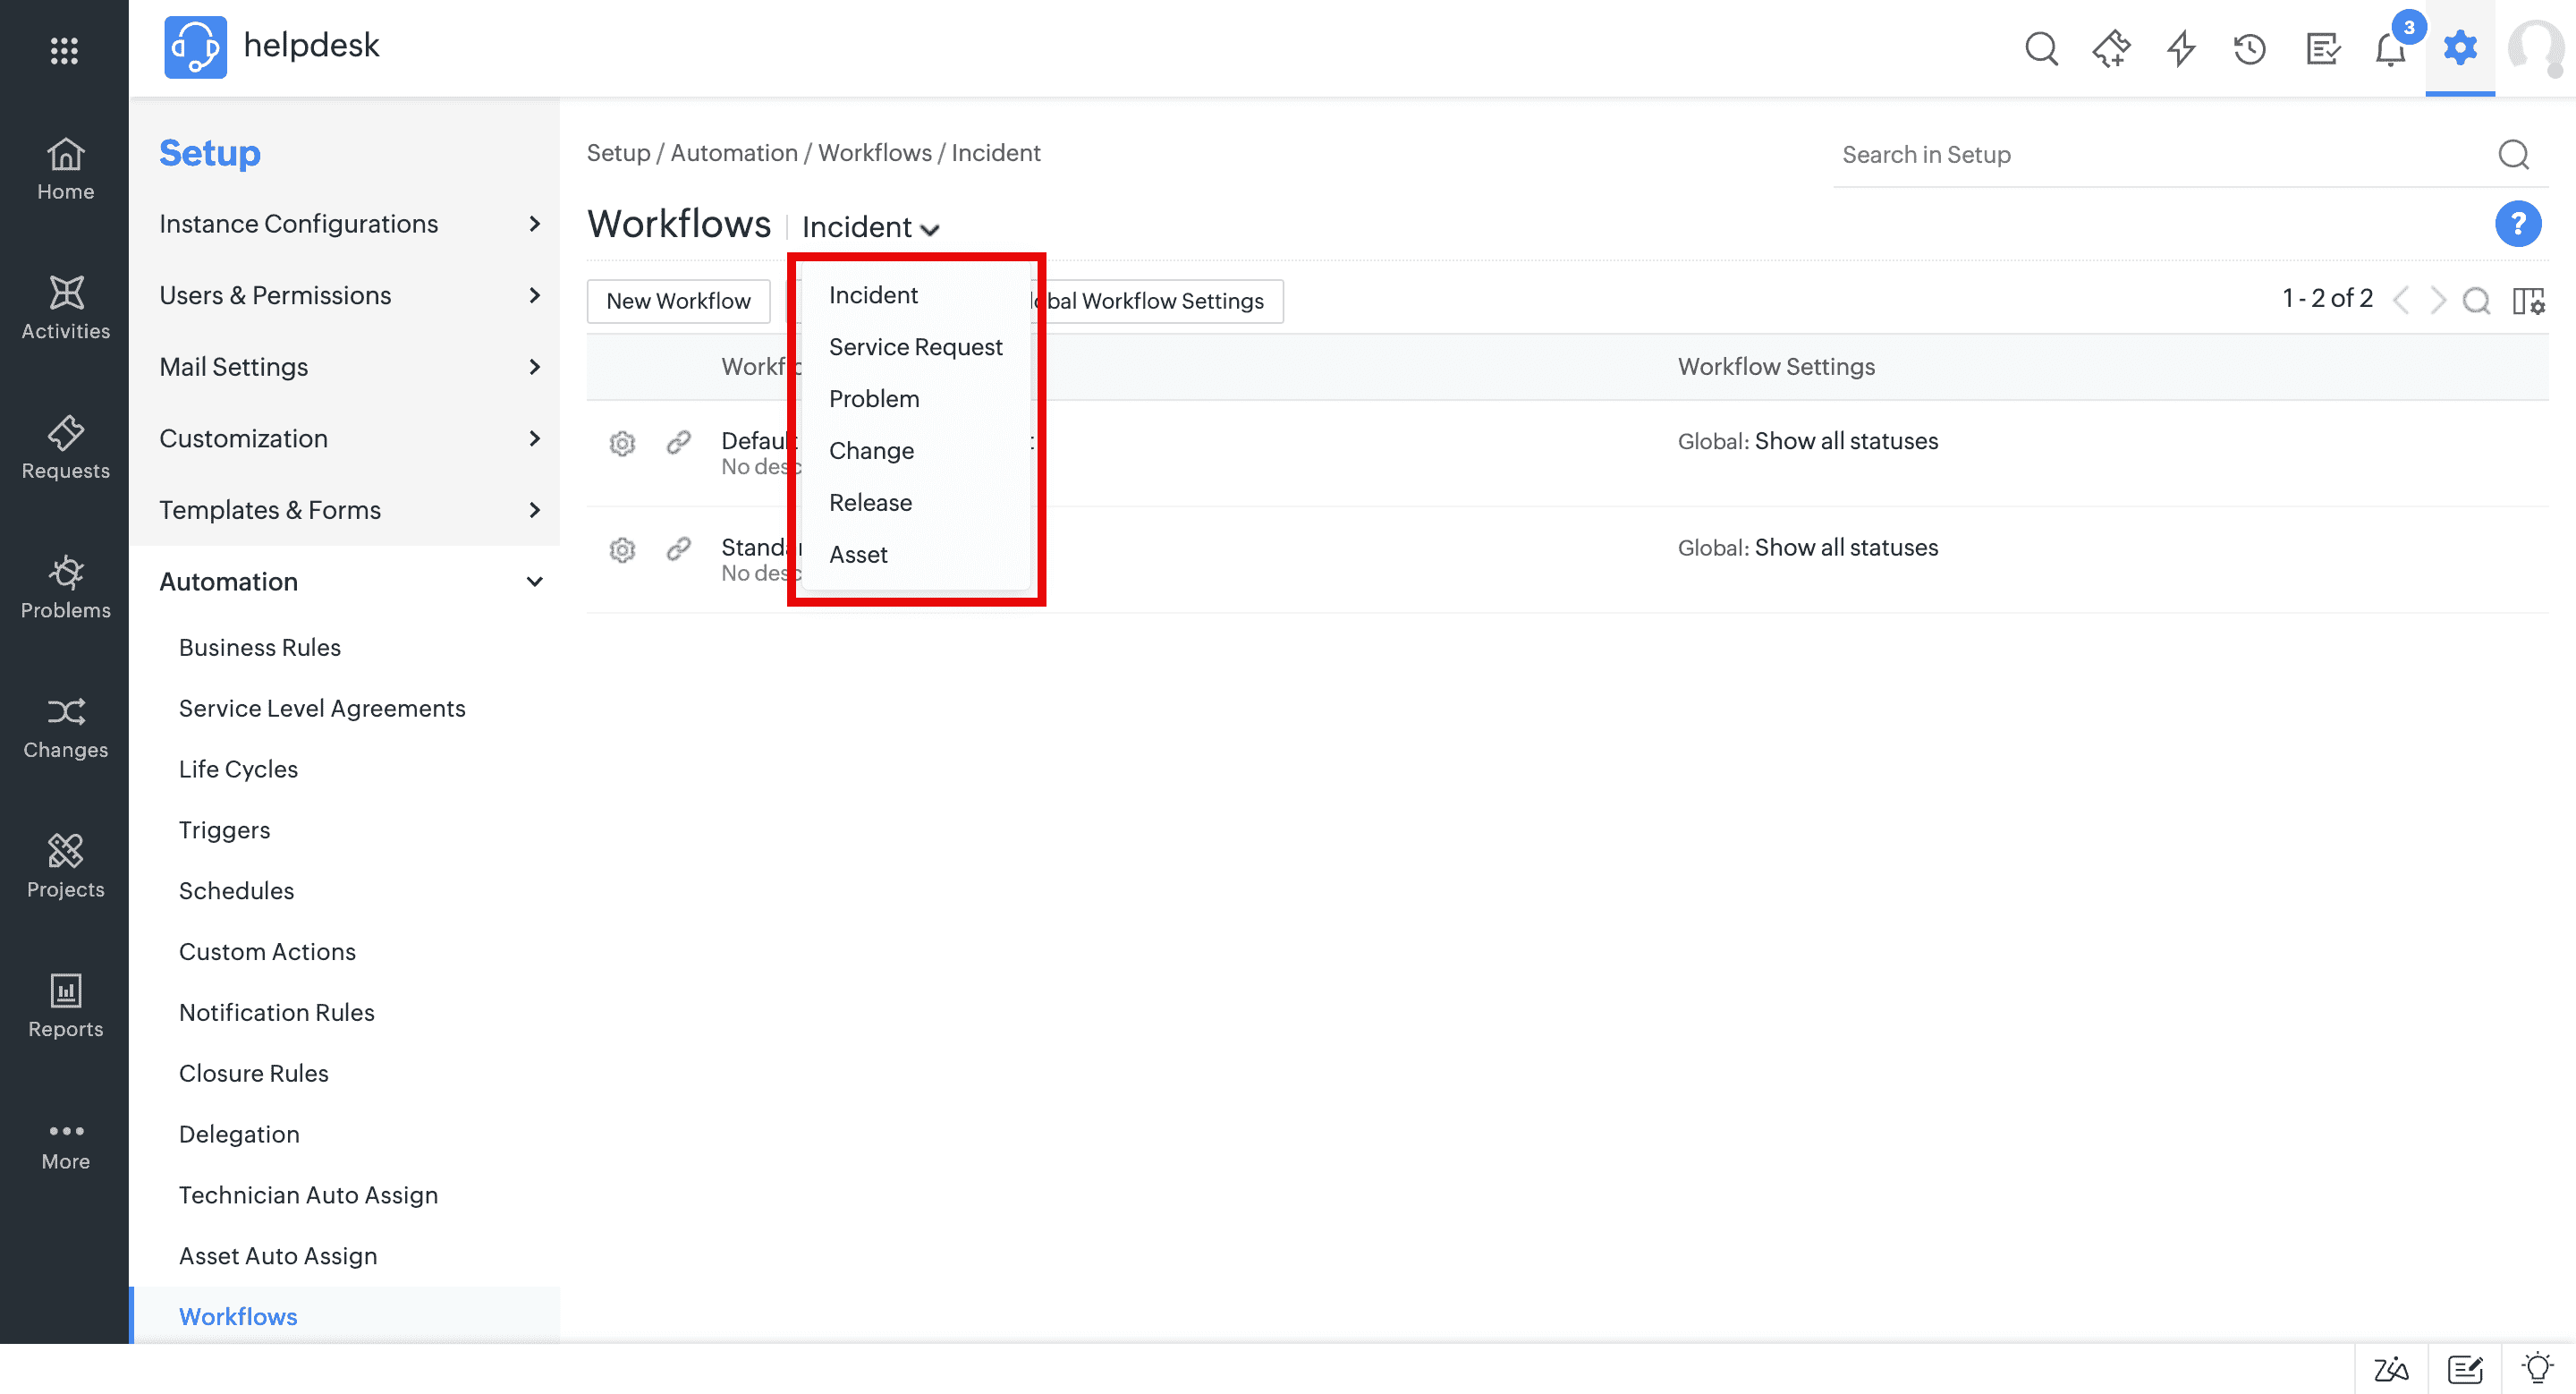 Workflows for Incident/Service Request